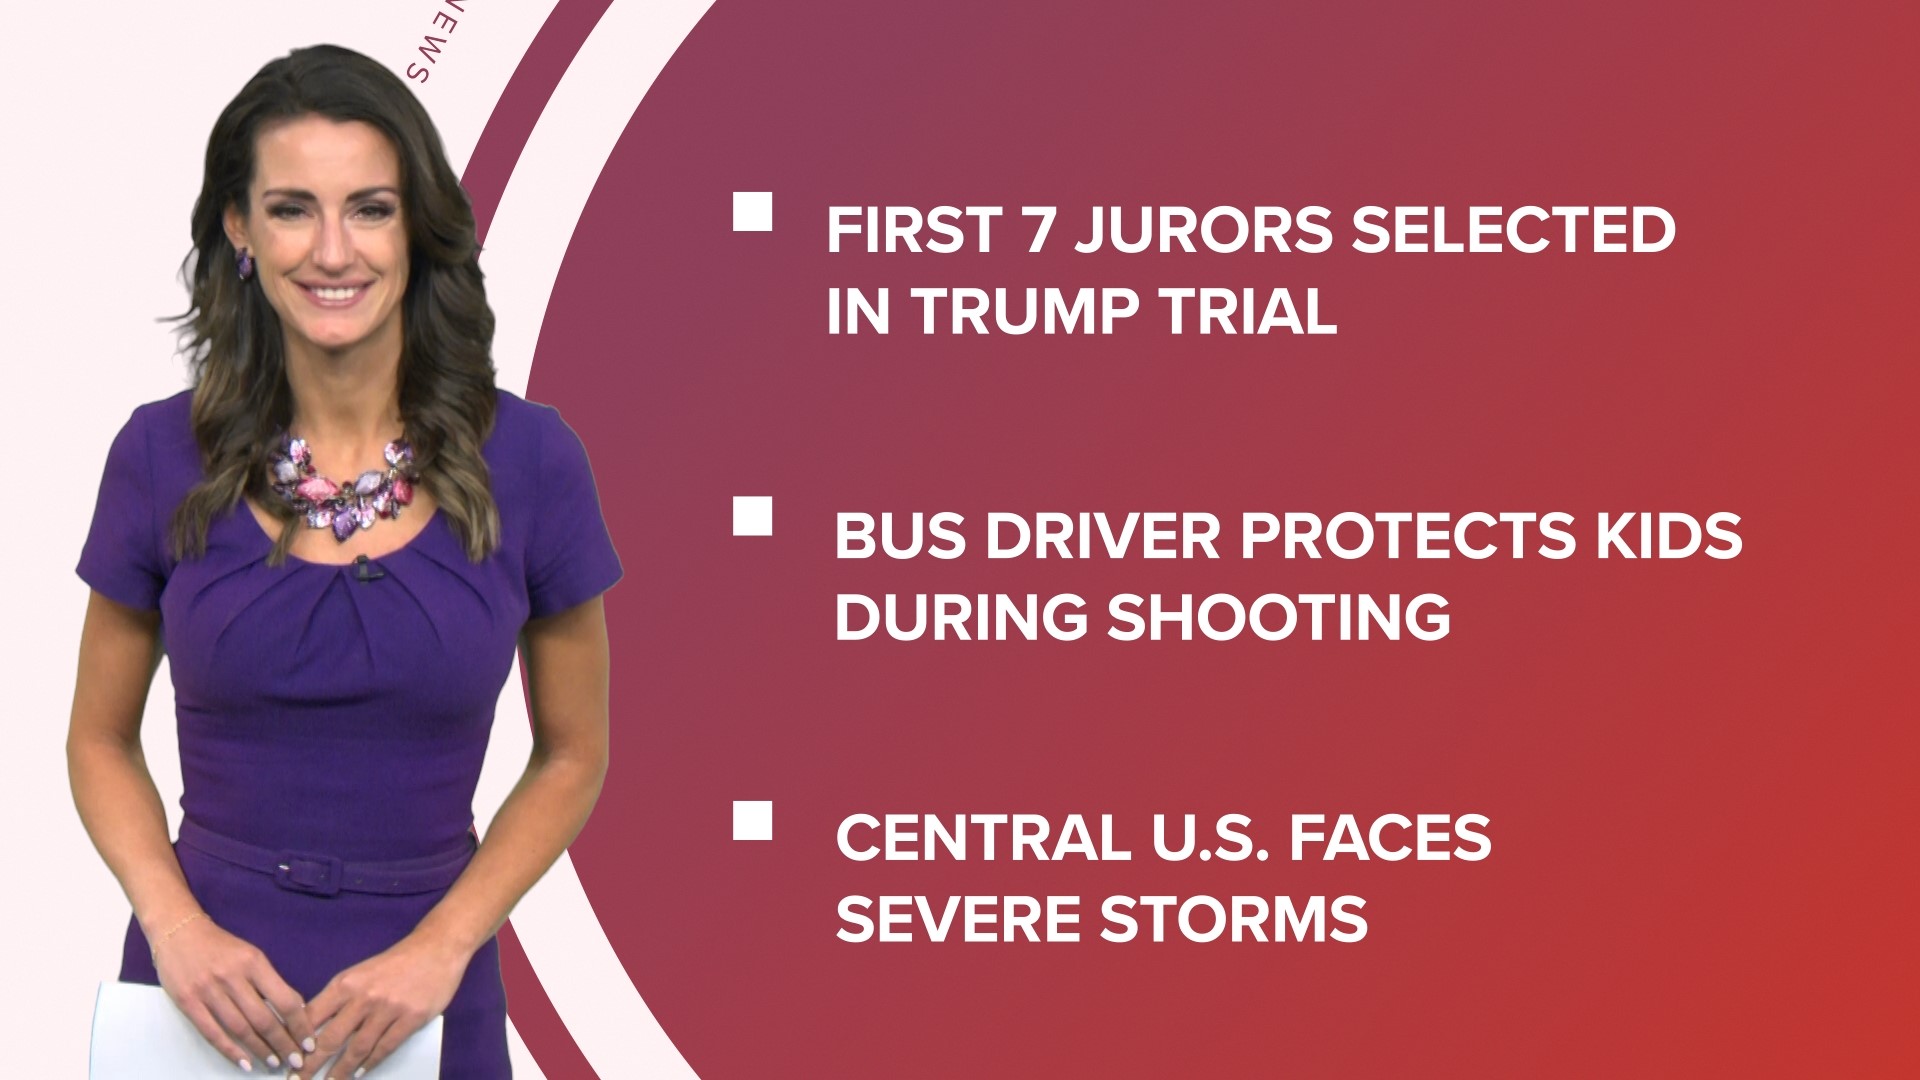 A look at what is happening in the news from 7 jurors selected so far in Trump's criminal trial to severe weather in the central U.S. and the Olympic flame is lit.